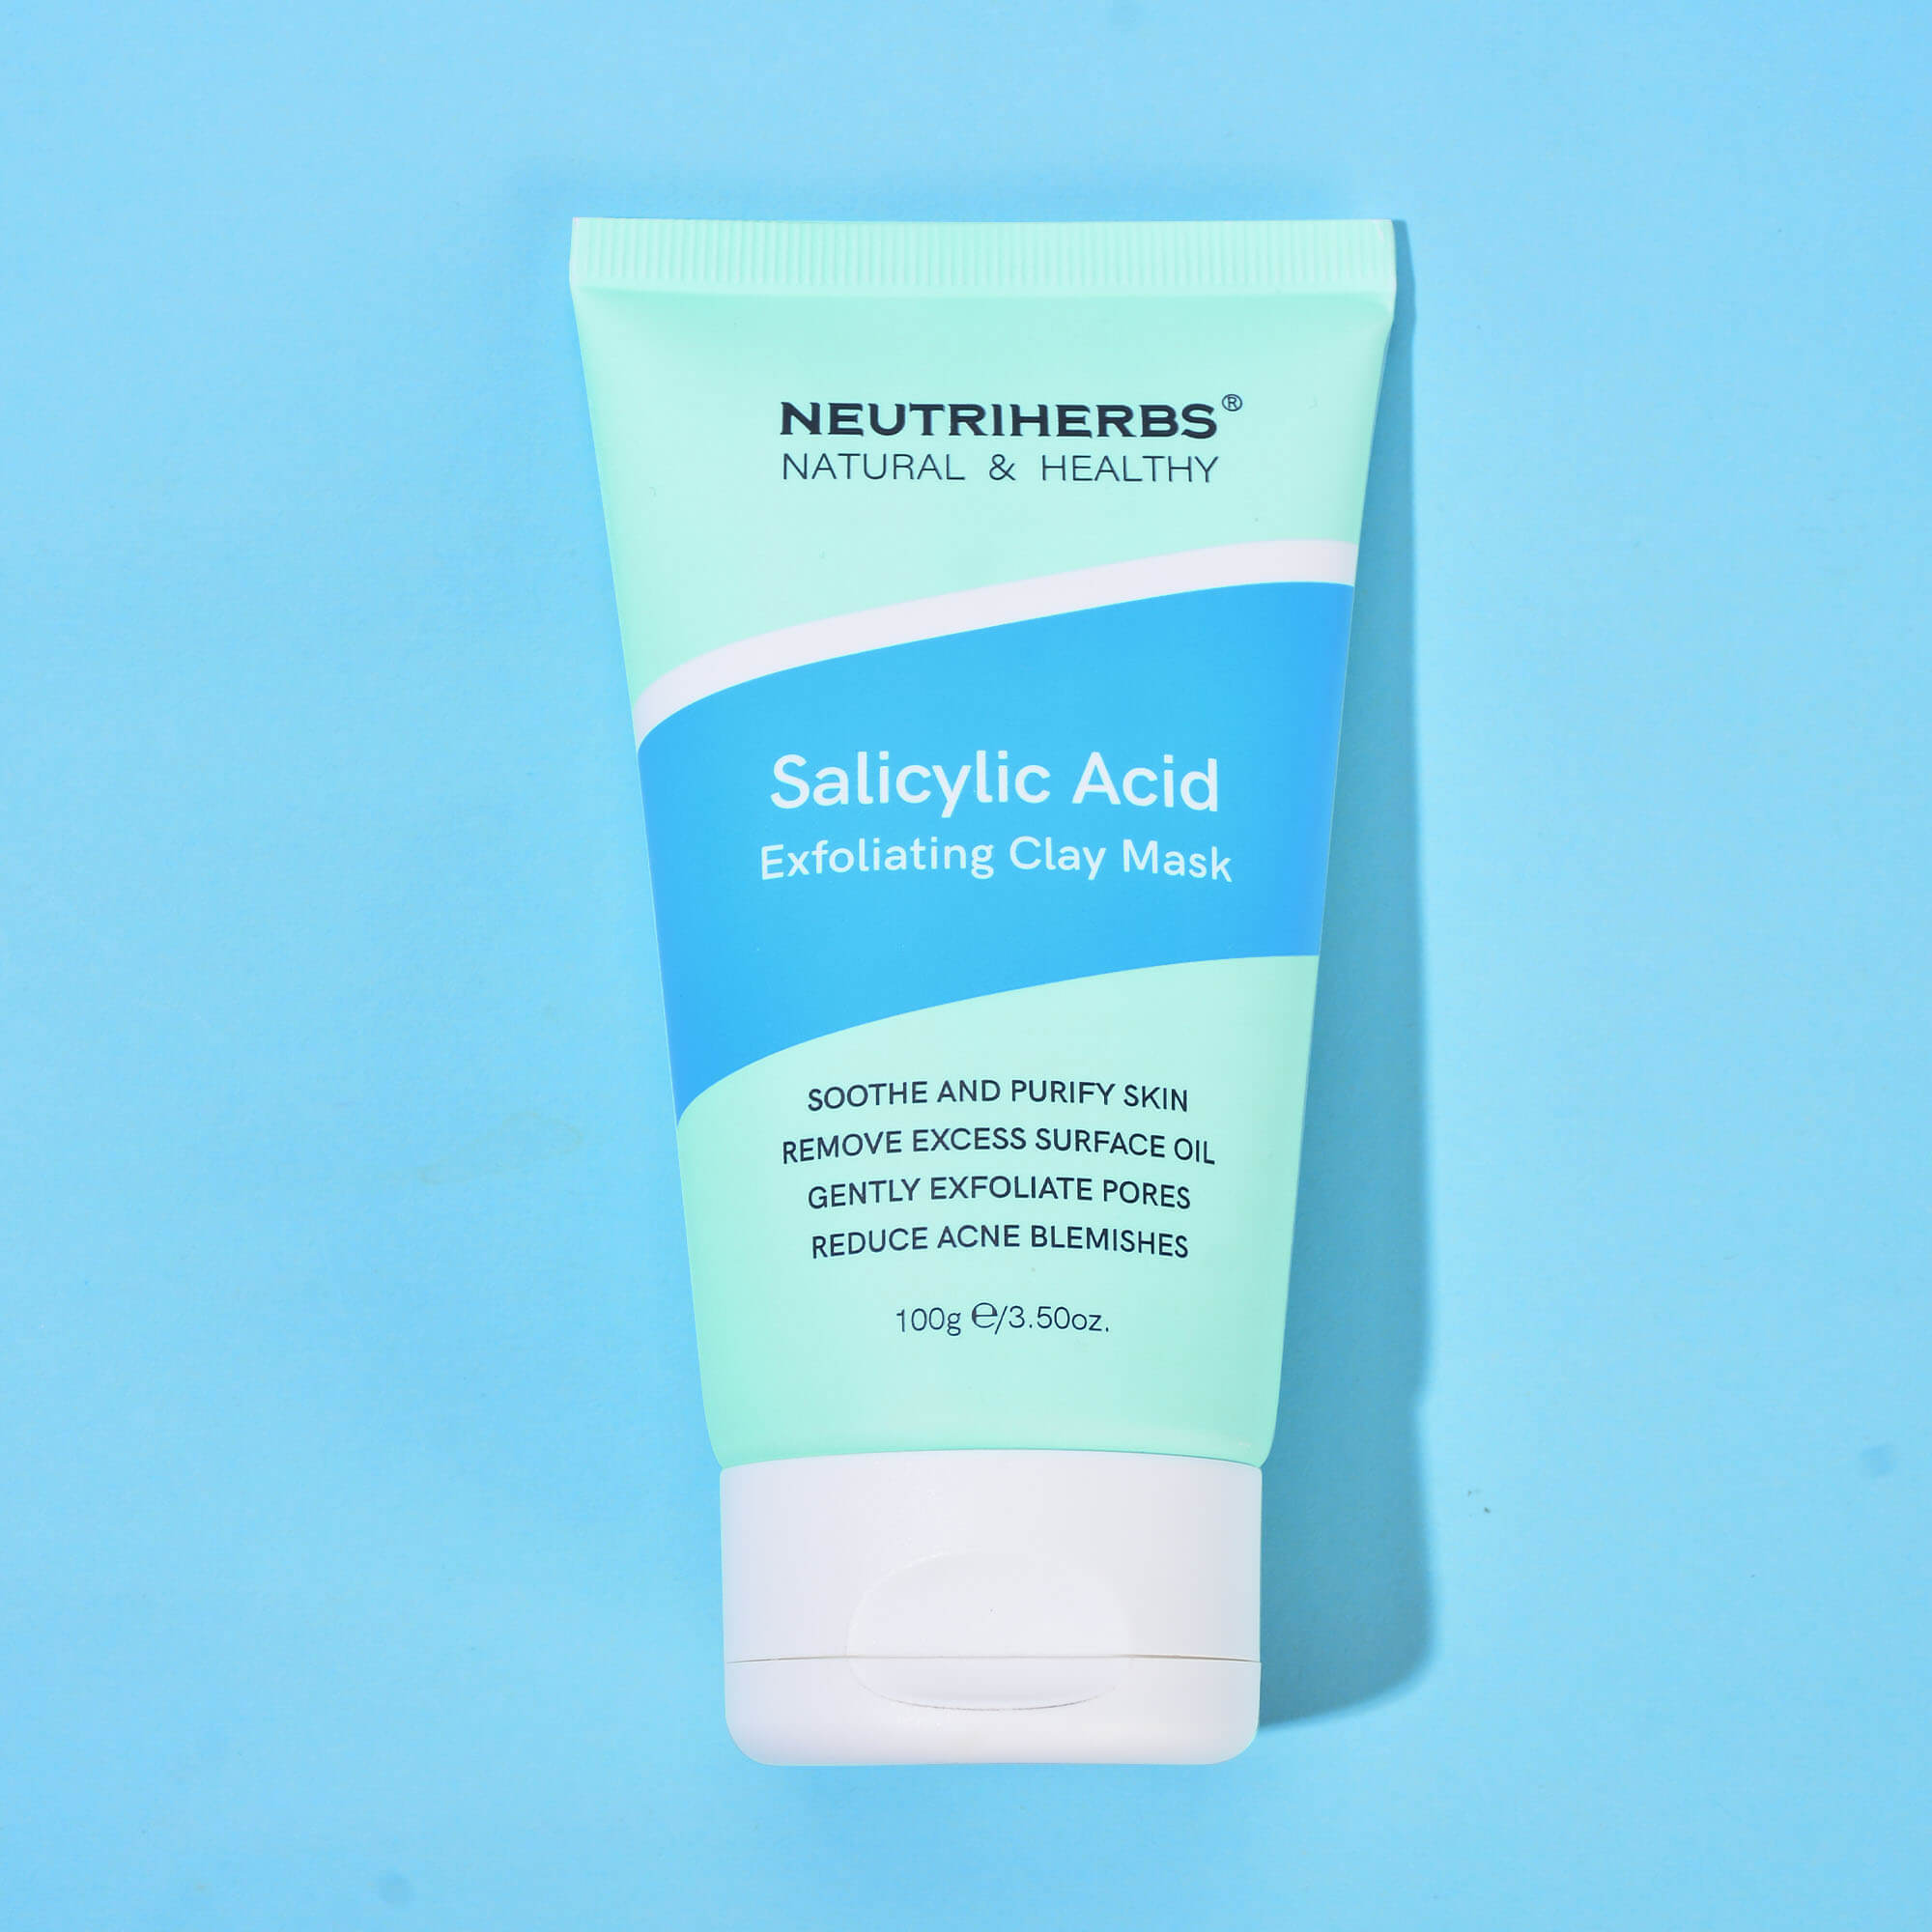 Neutriherbs best Salicylic Acid Clay Mask before and after